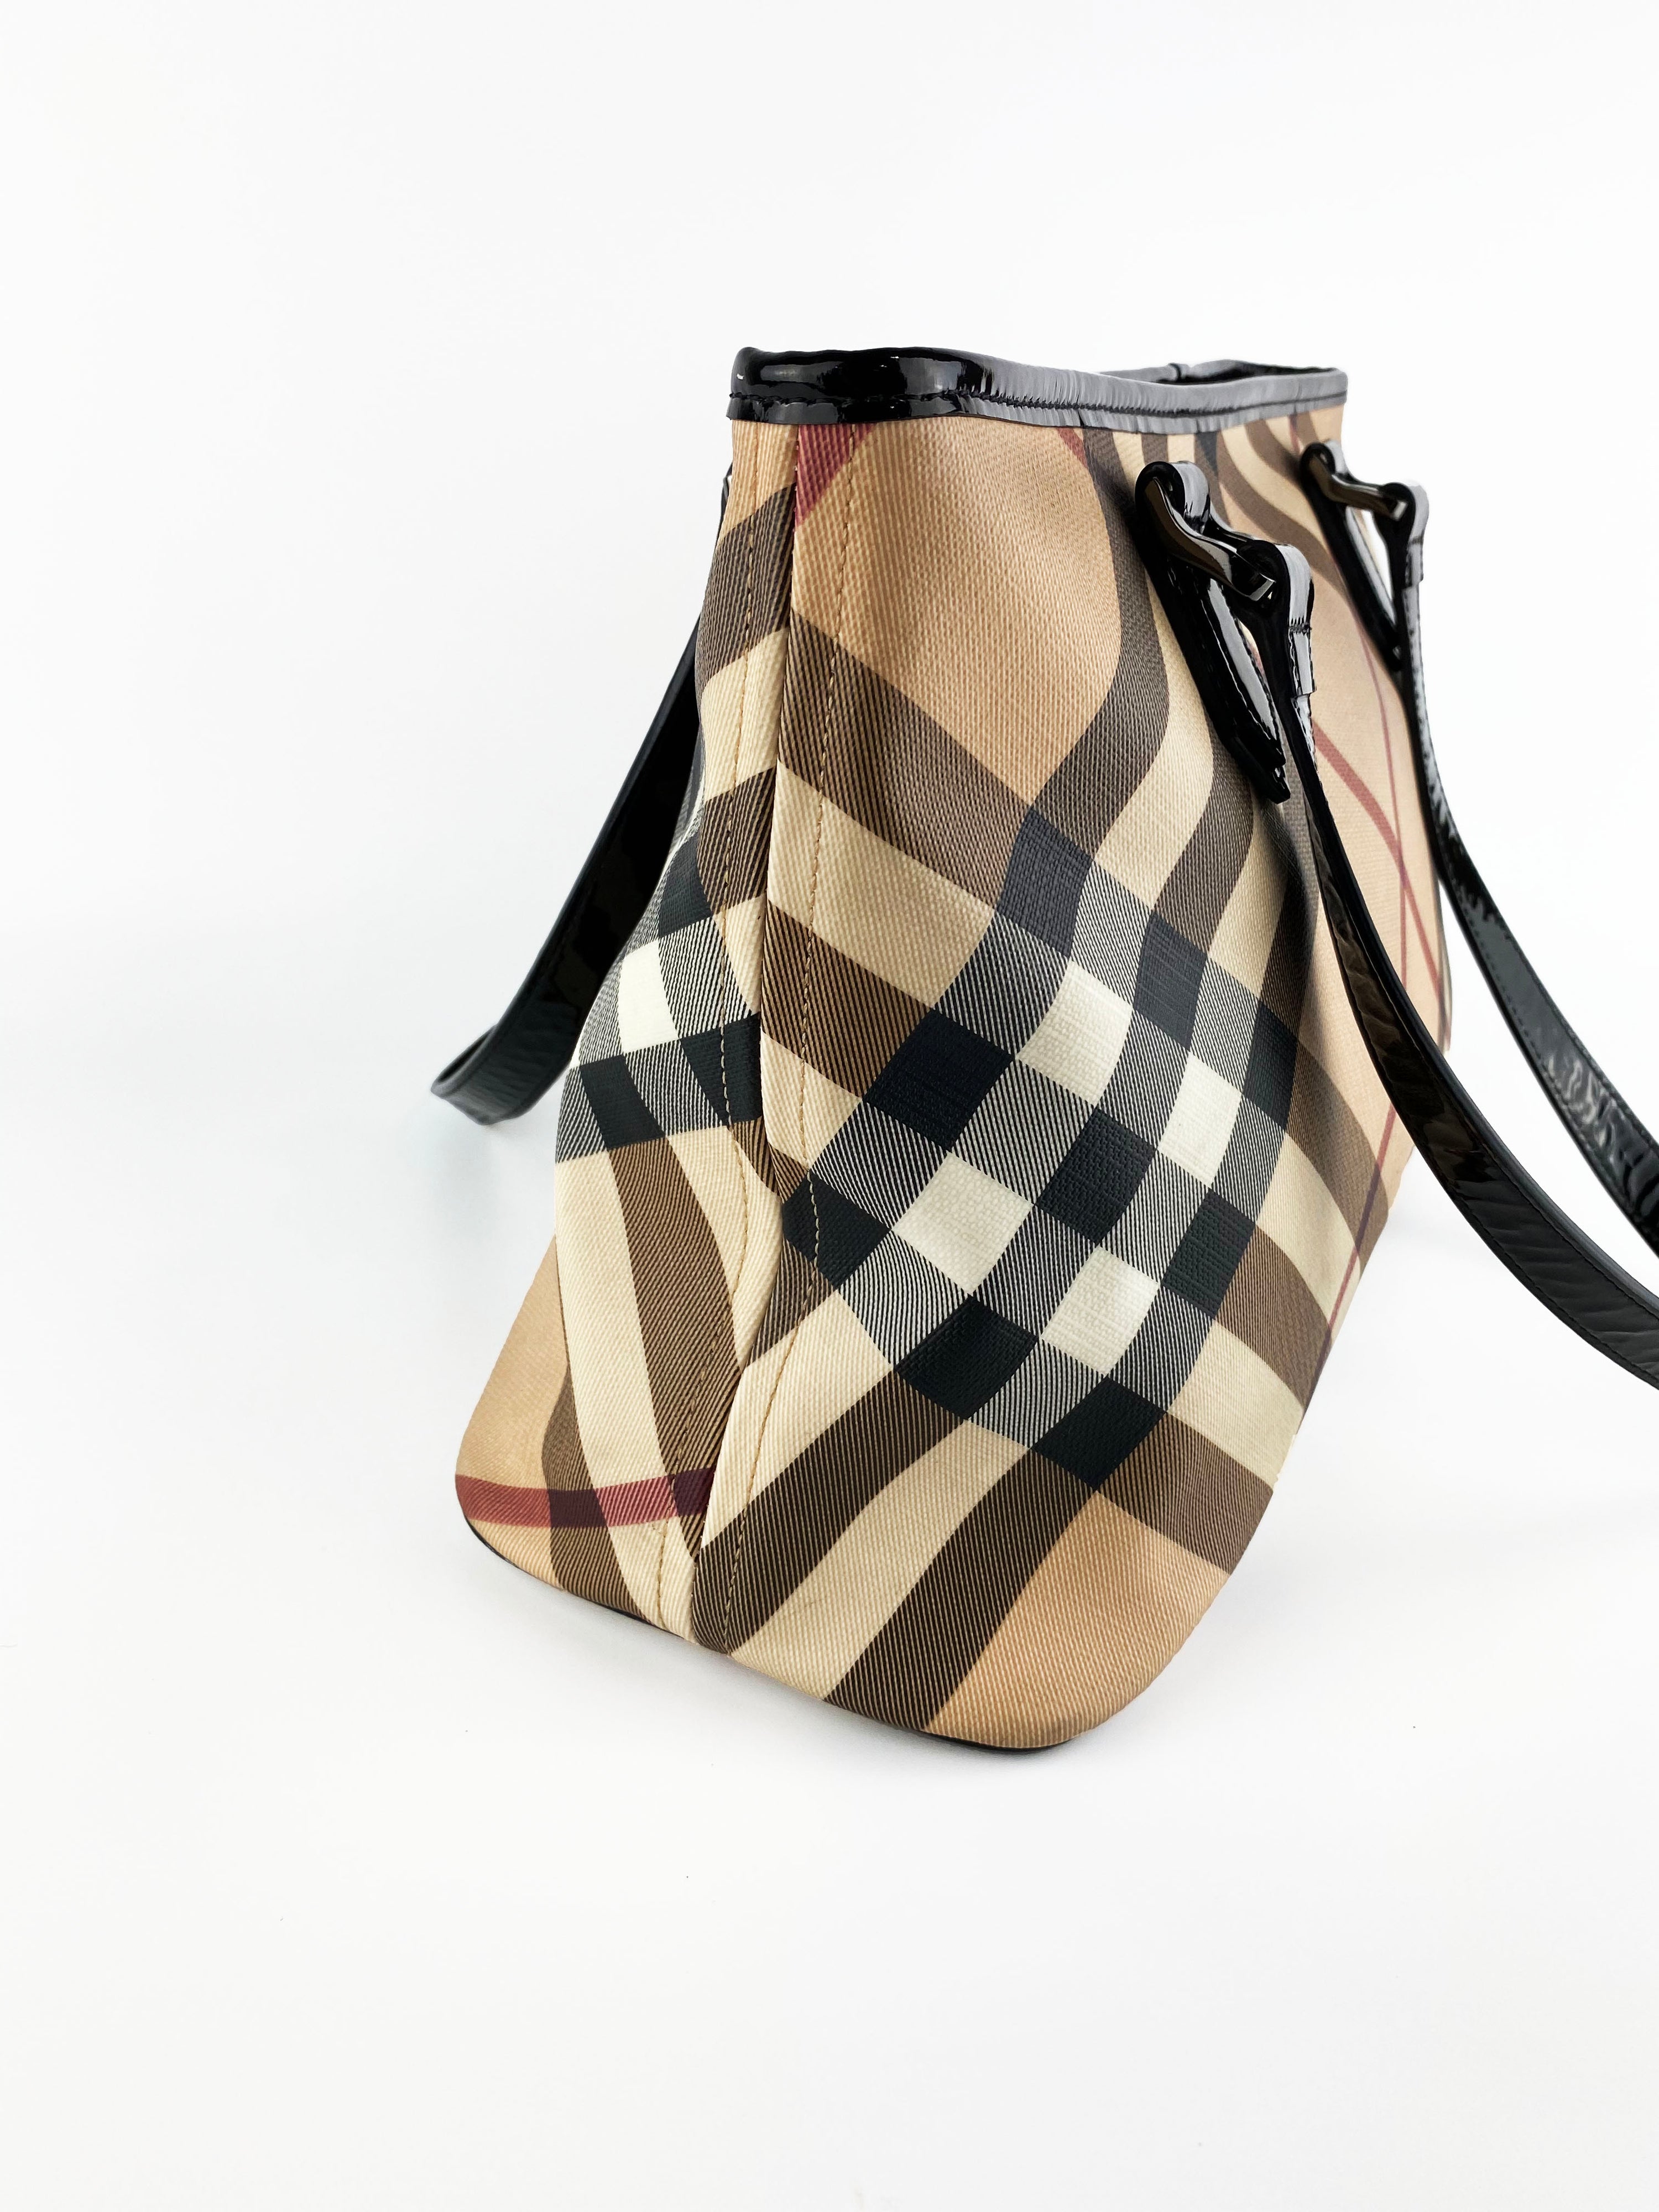 Burberry Vintage Check Tote